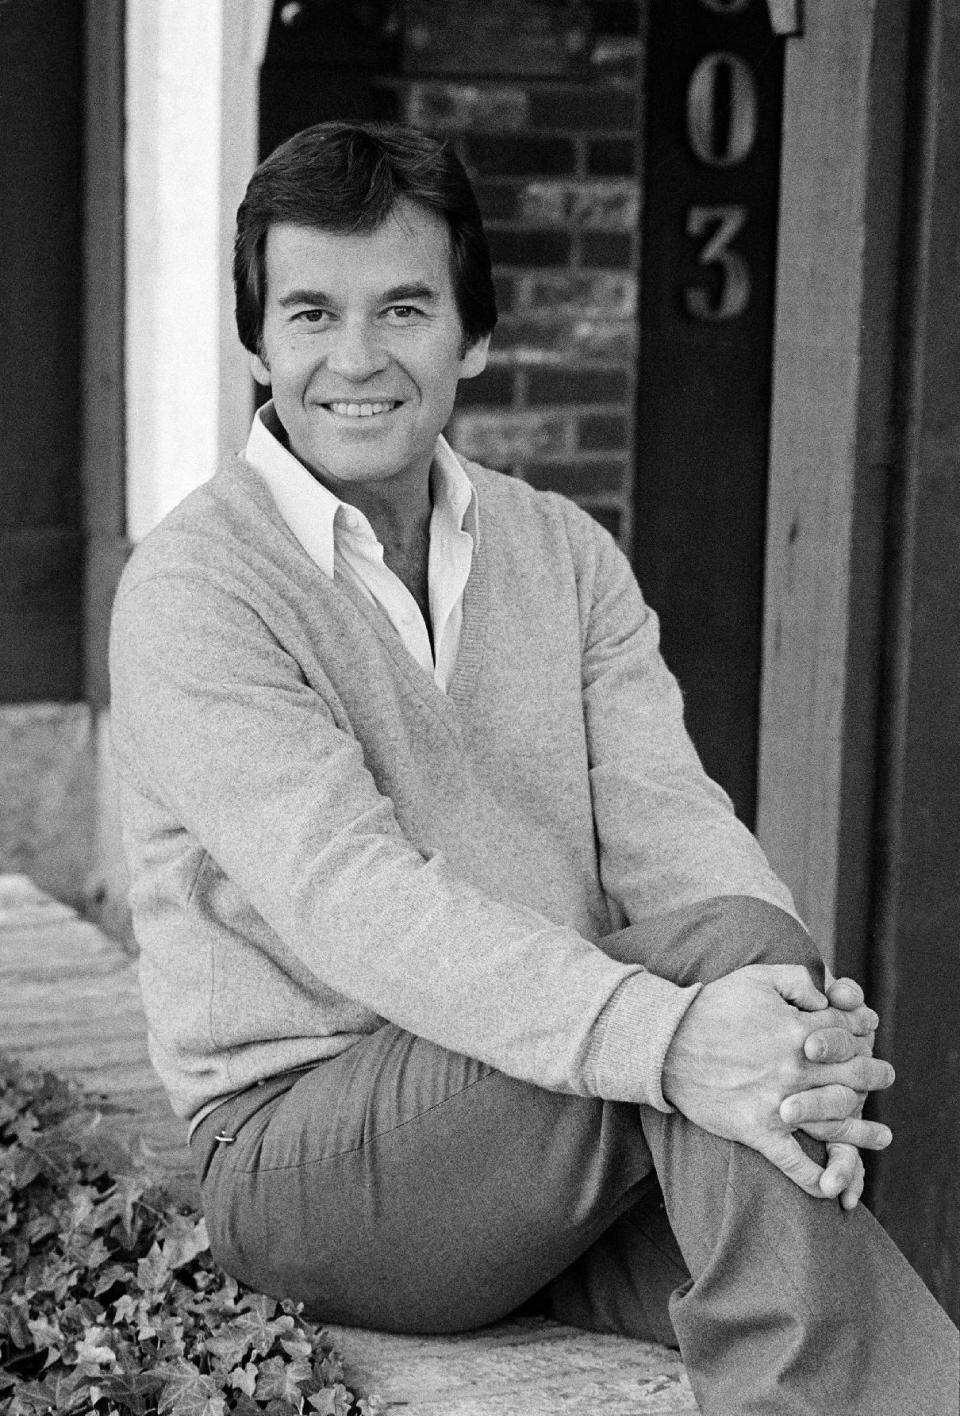 FILE - This March 8, 1982 file photo shows Dick Clark. Clark, the television host who helped bring rock `n' roll into the mainstream on "American Bandstand," died Wednesday, April 18, 2012 of a heart attack. He was 82. (AP Photo/file)